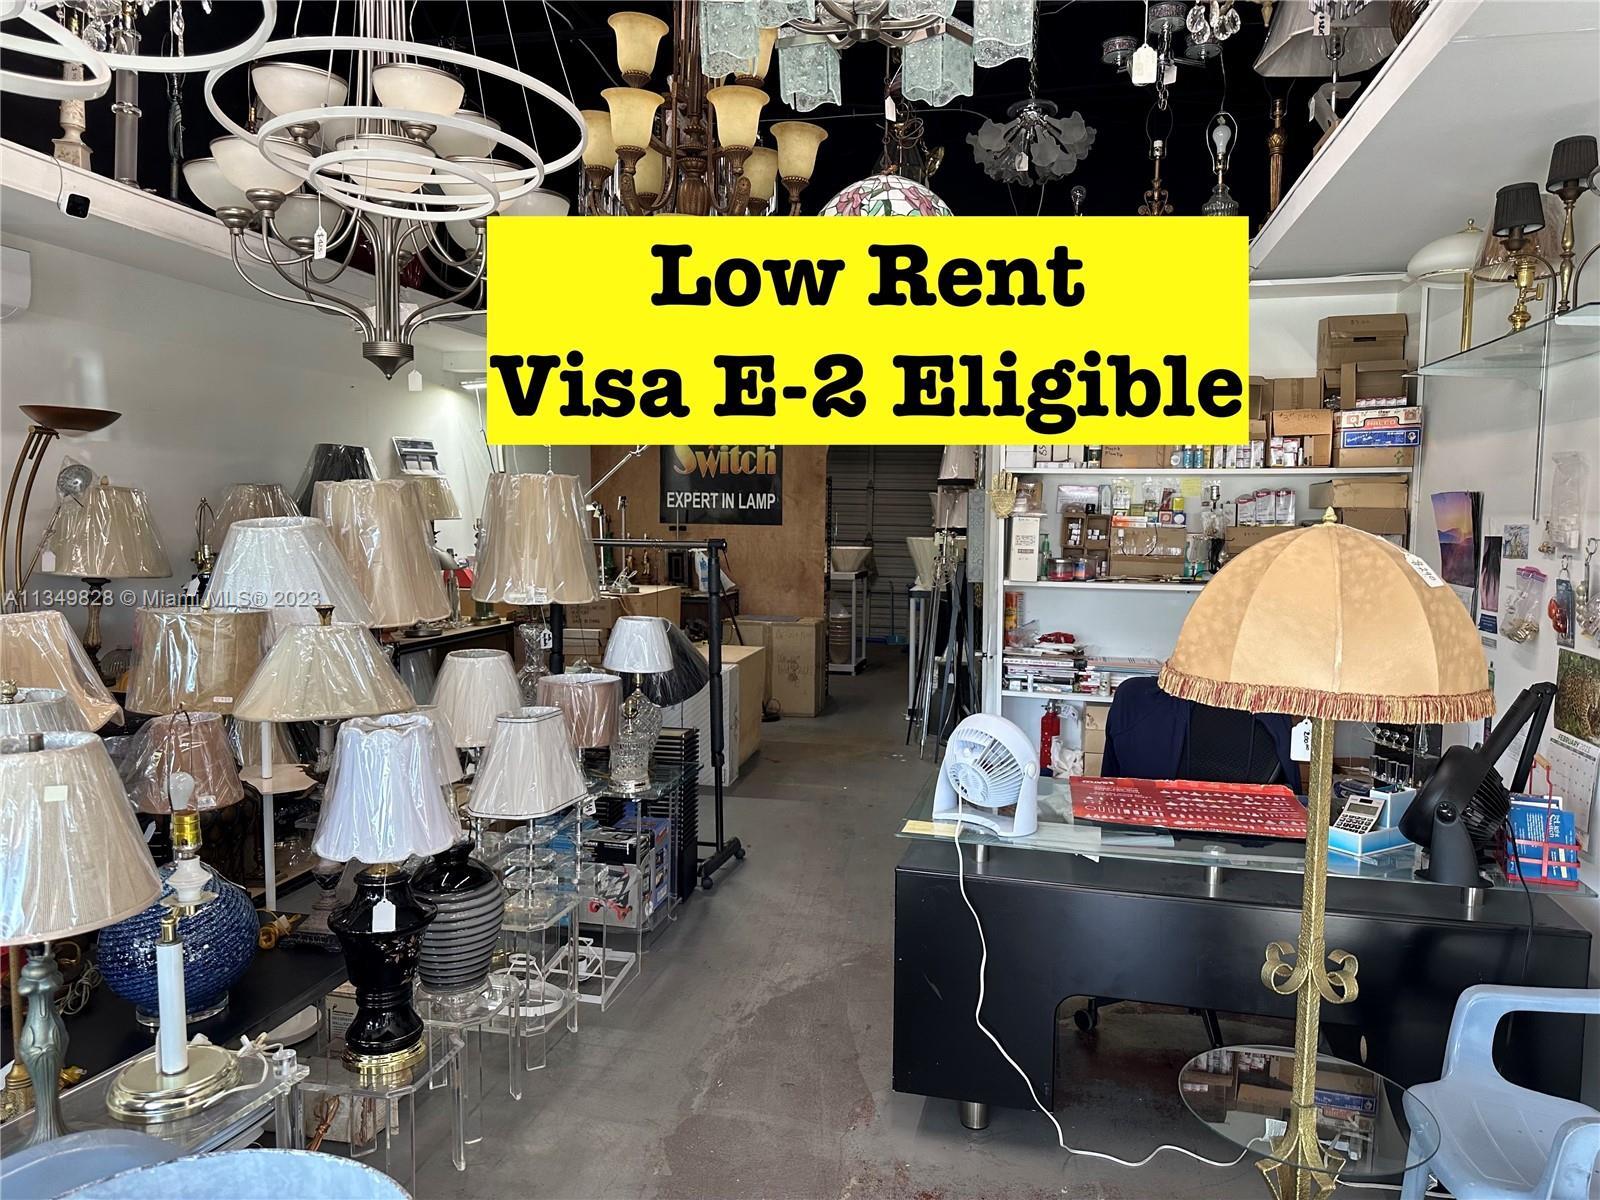 Amazing business in Pompano can be apply for the E-2 Visa .
Huge Income in grad area. 
Rent $1,000